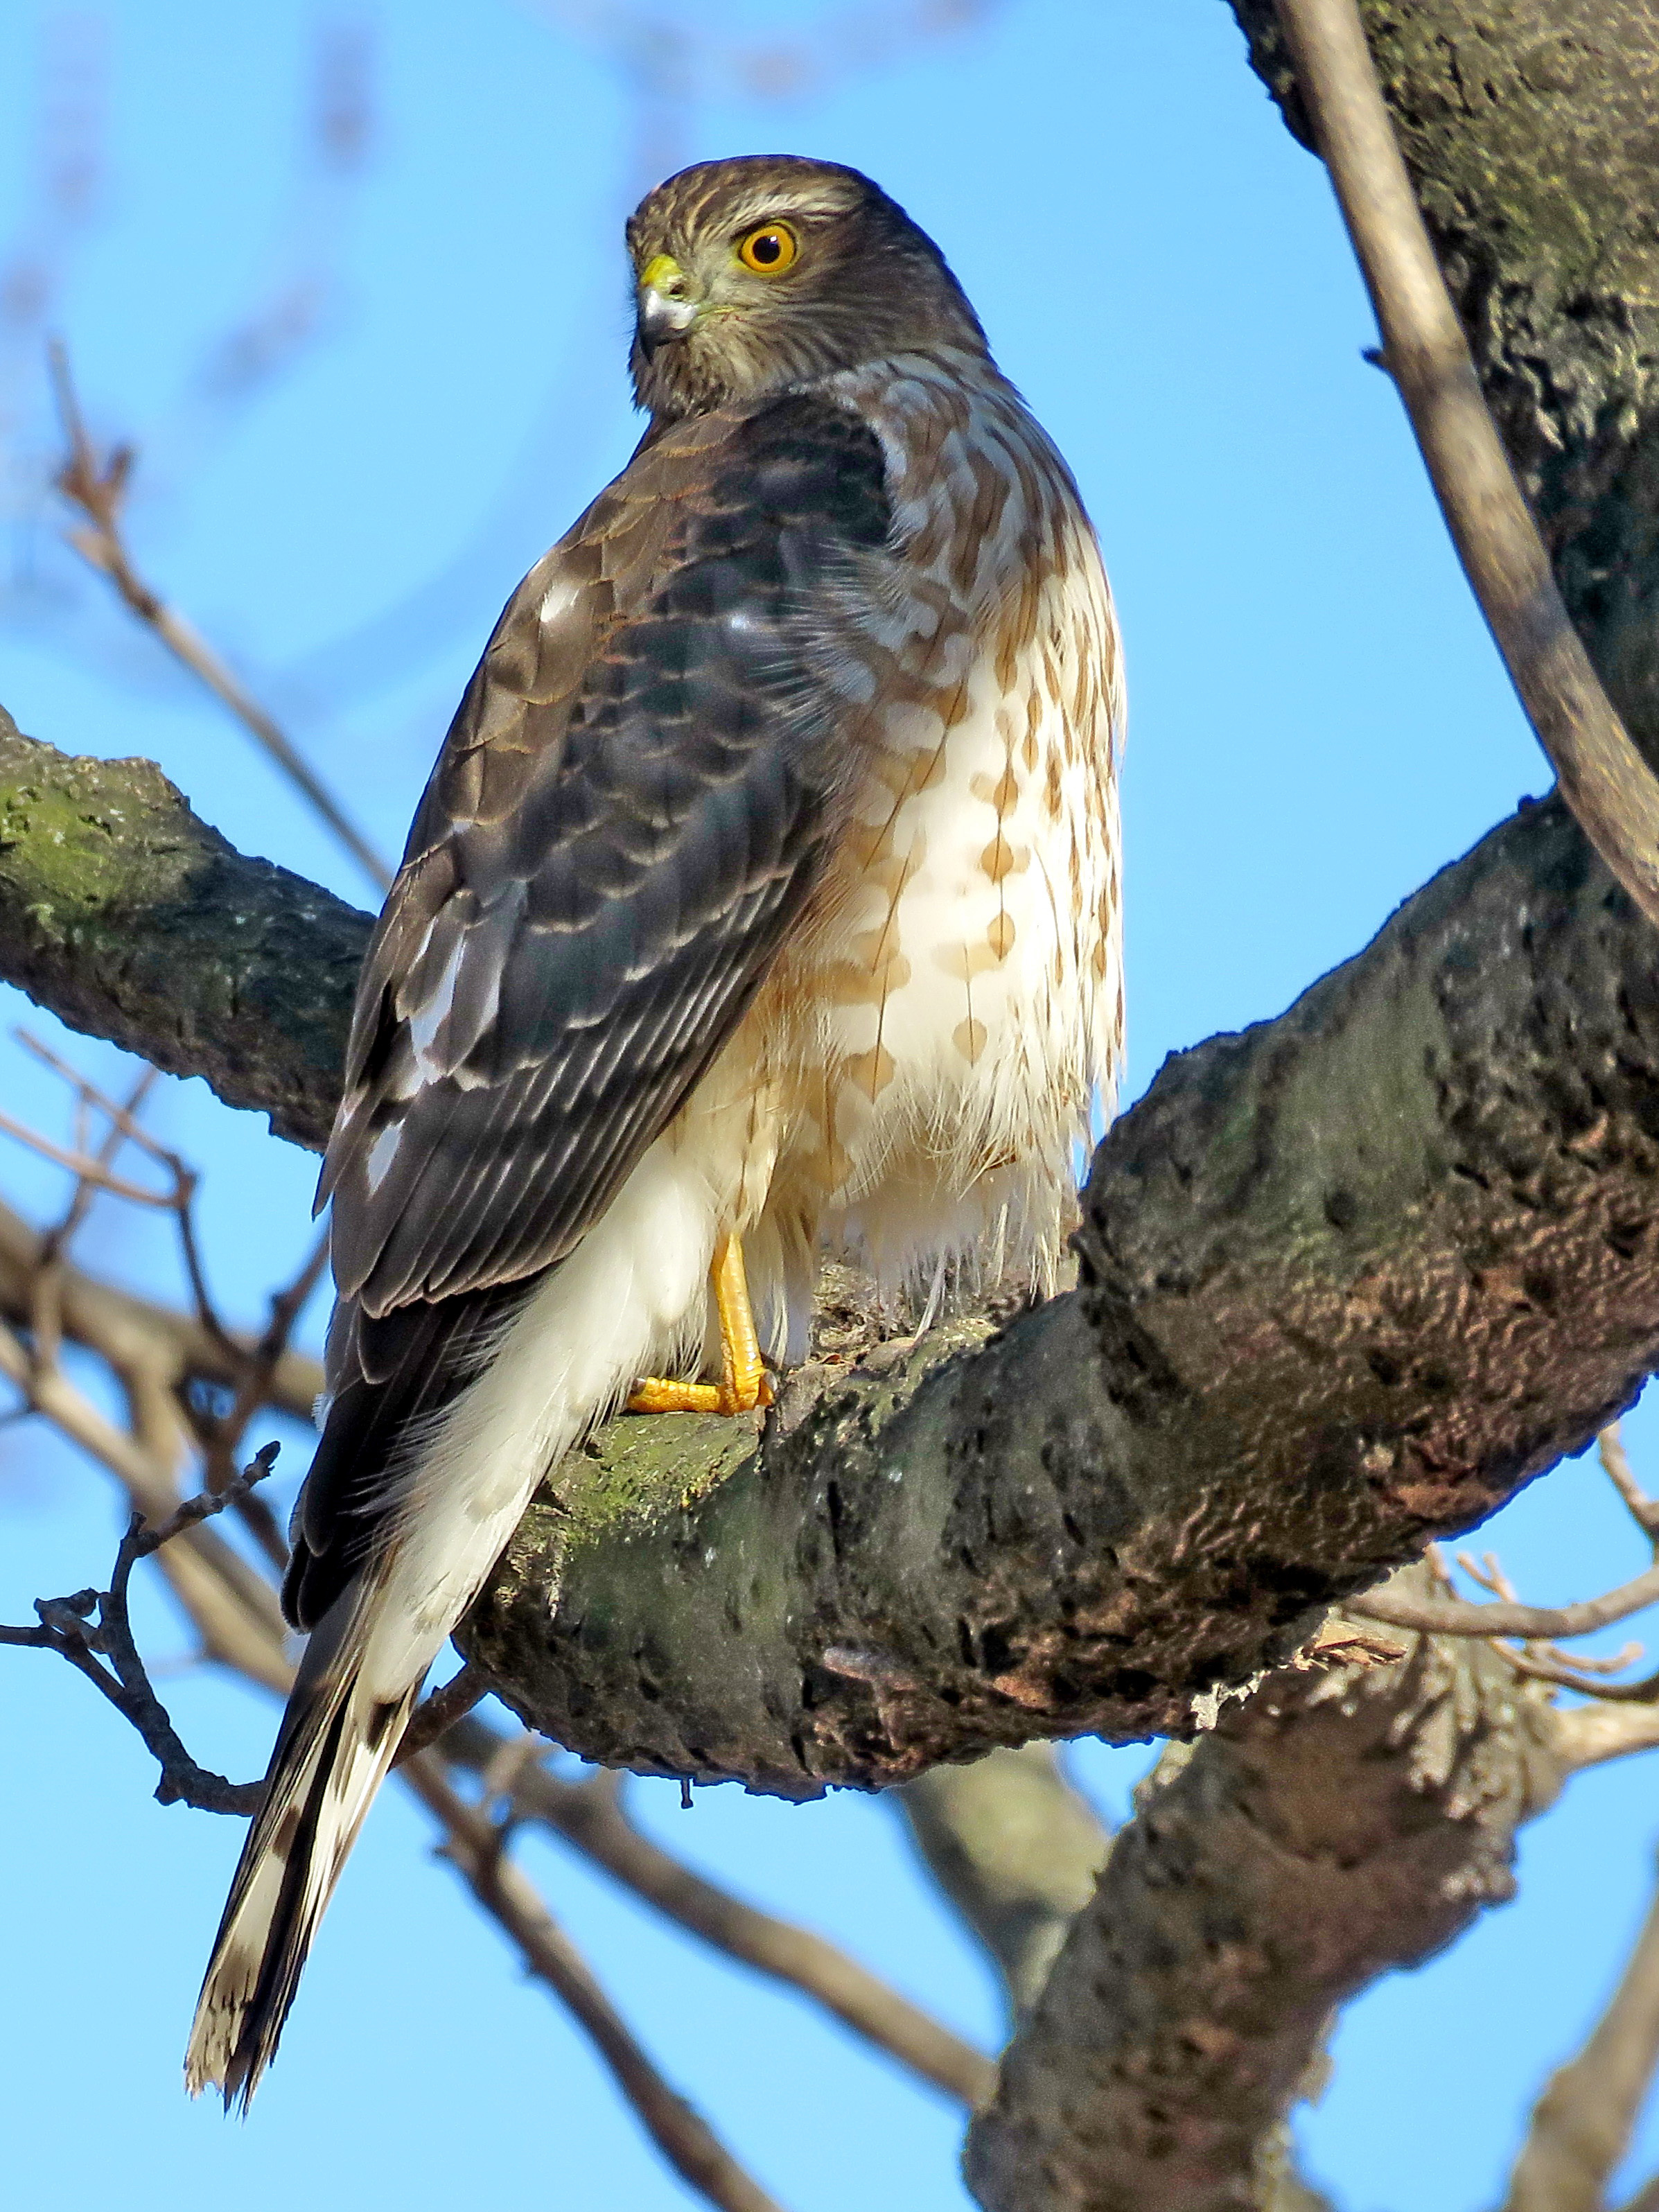 A Coopers Hawk